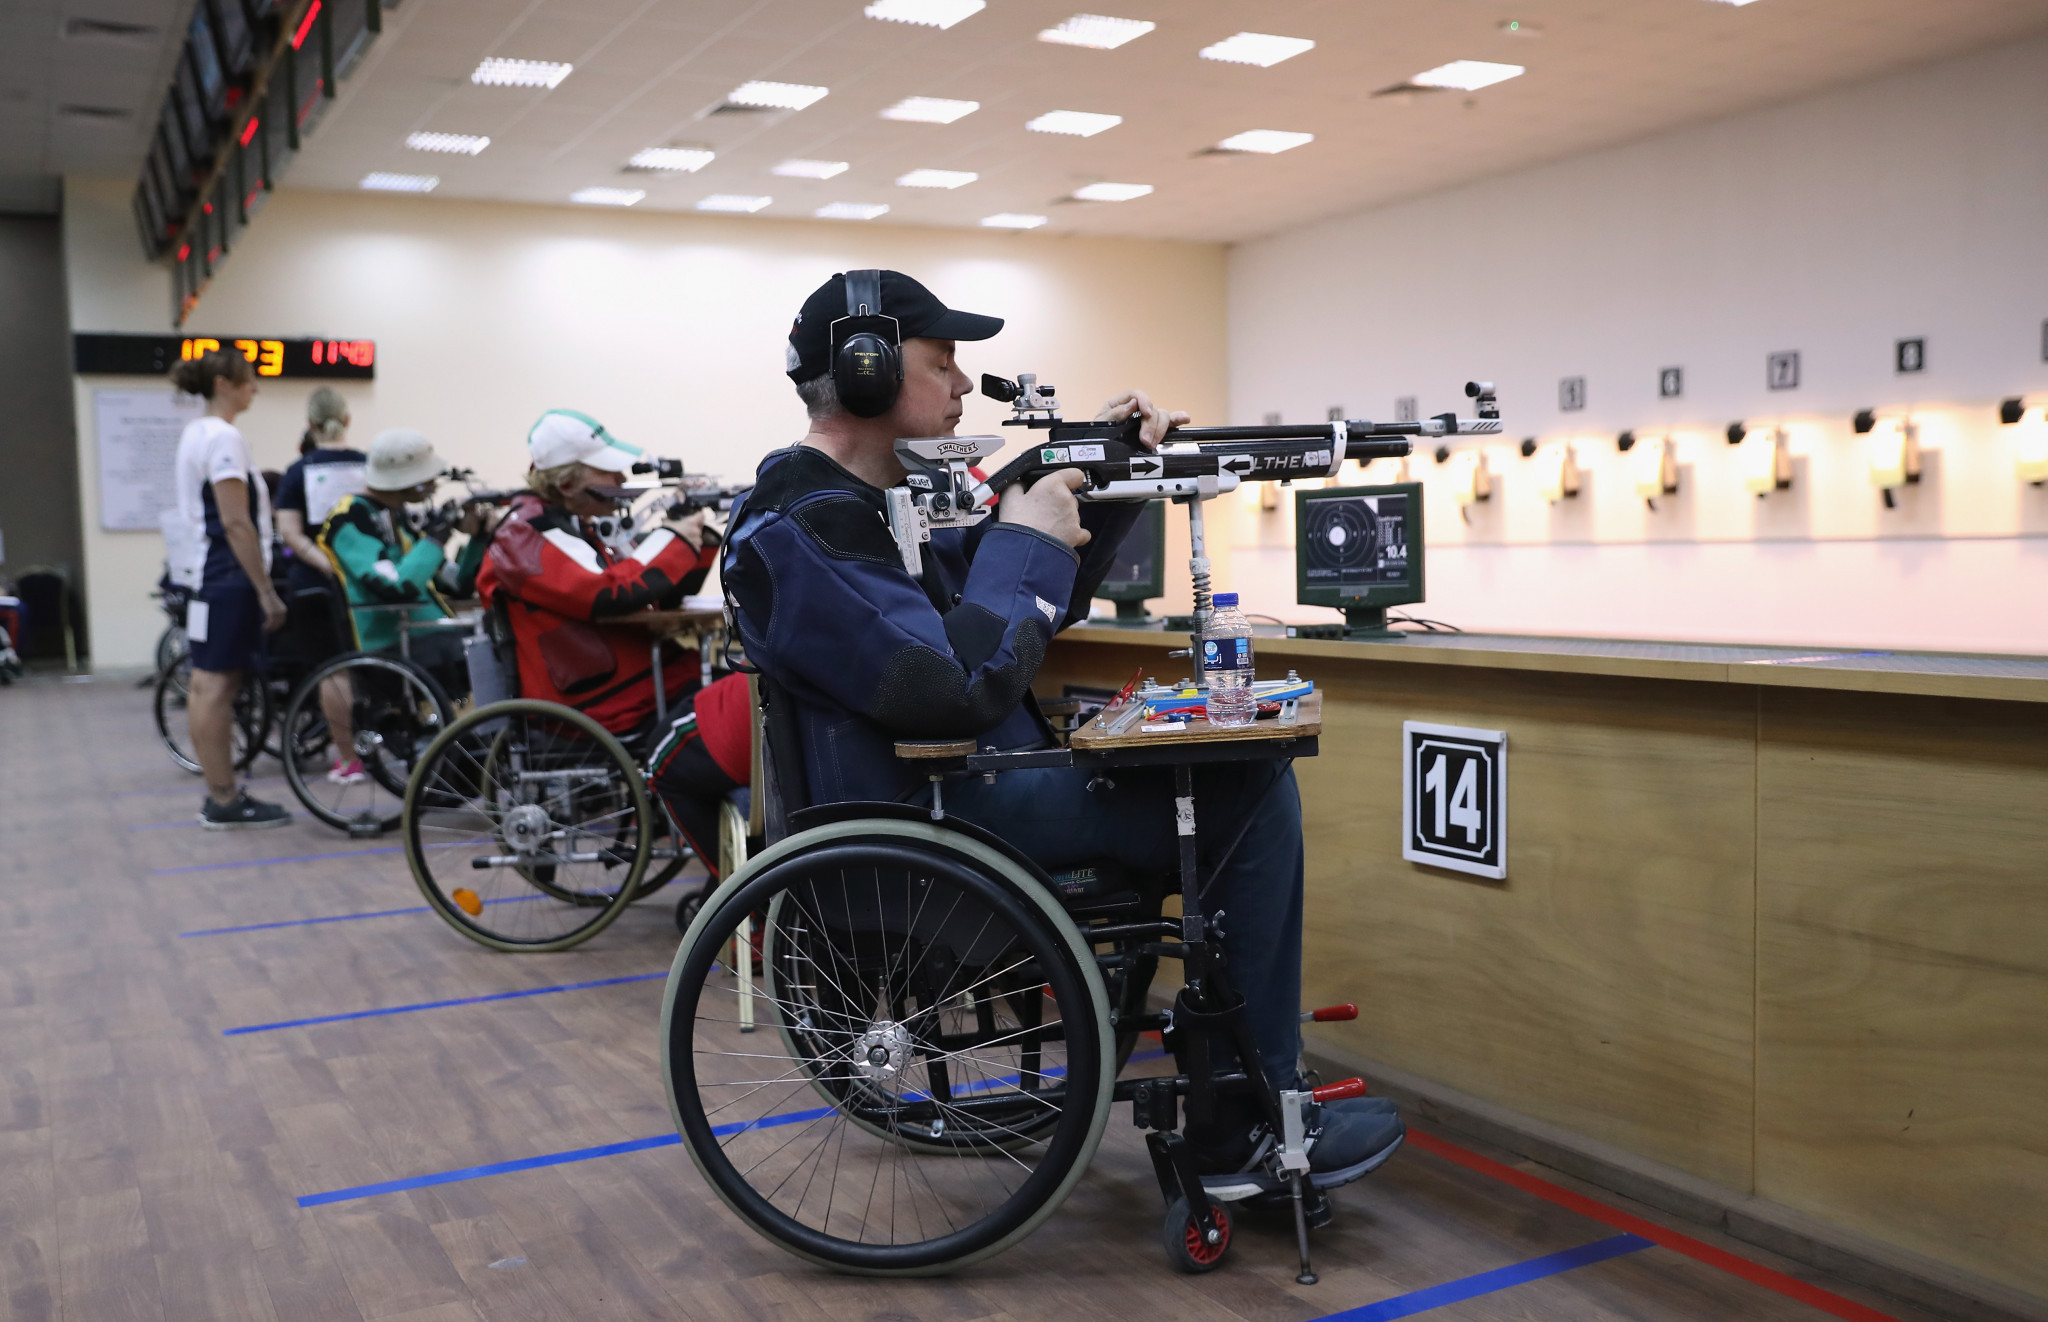 South Korean team excel at World Shooting Para Sport World Cup in Changwon